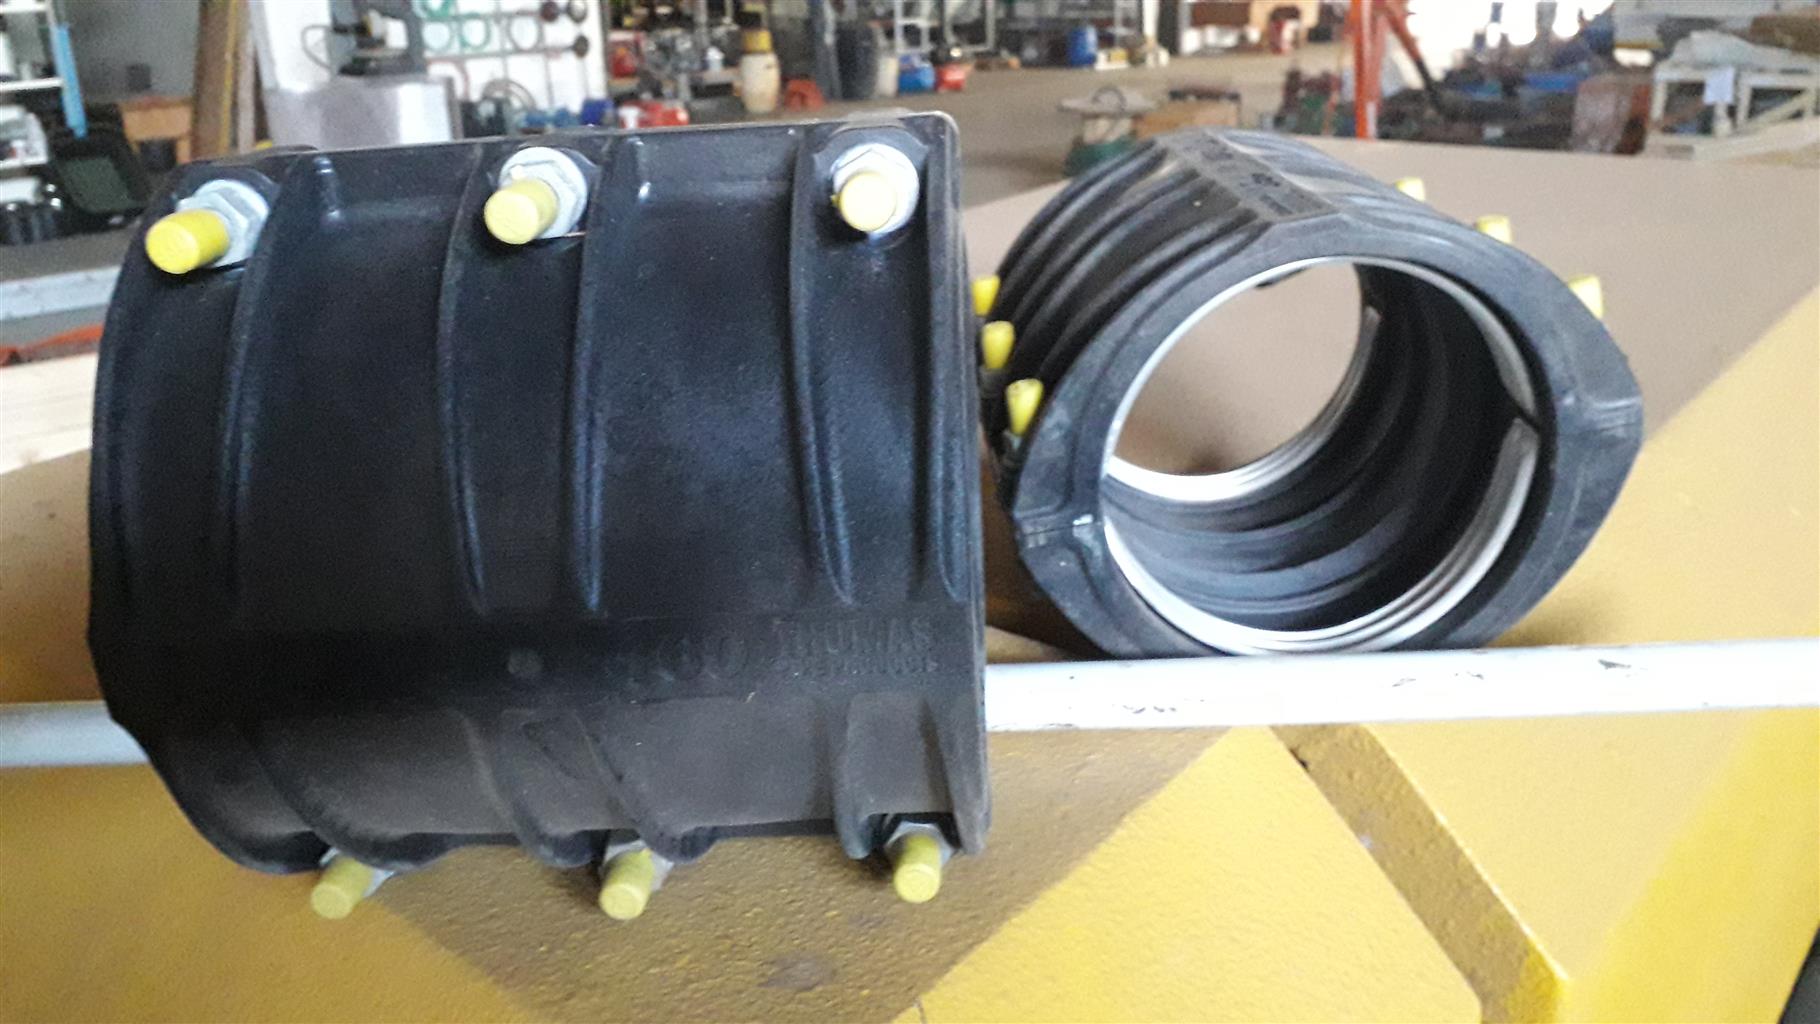 Thomas Evogrip 160mm couplings for PVC and HDPE pipe